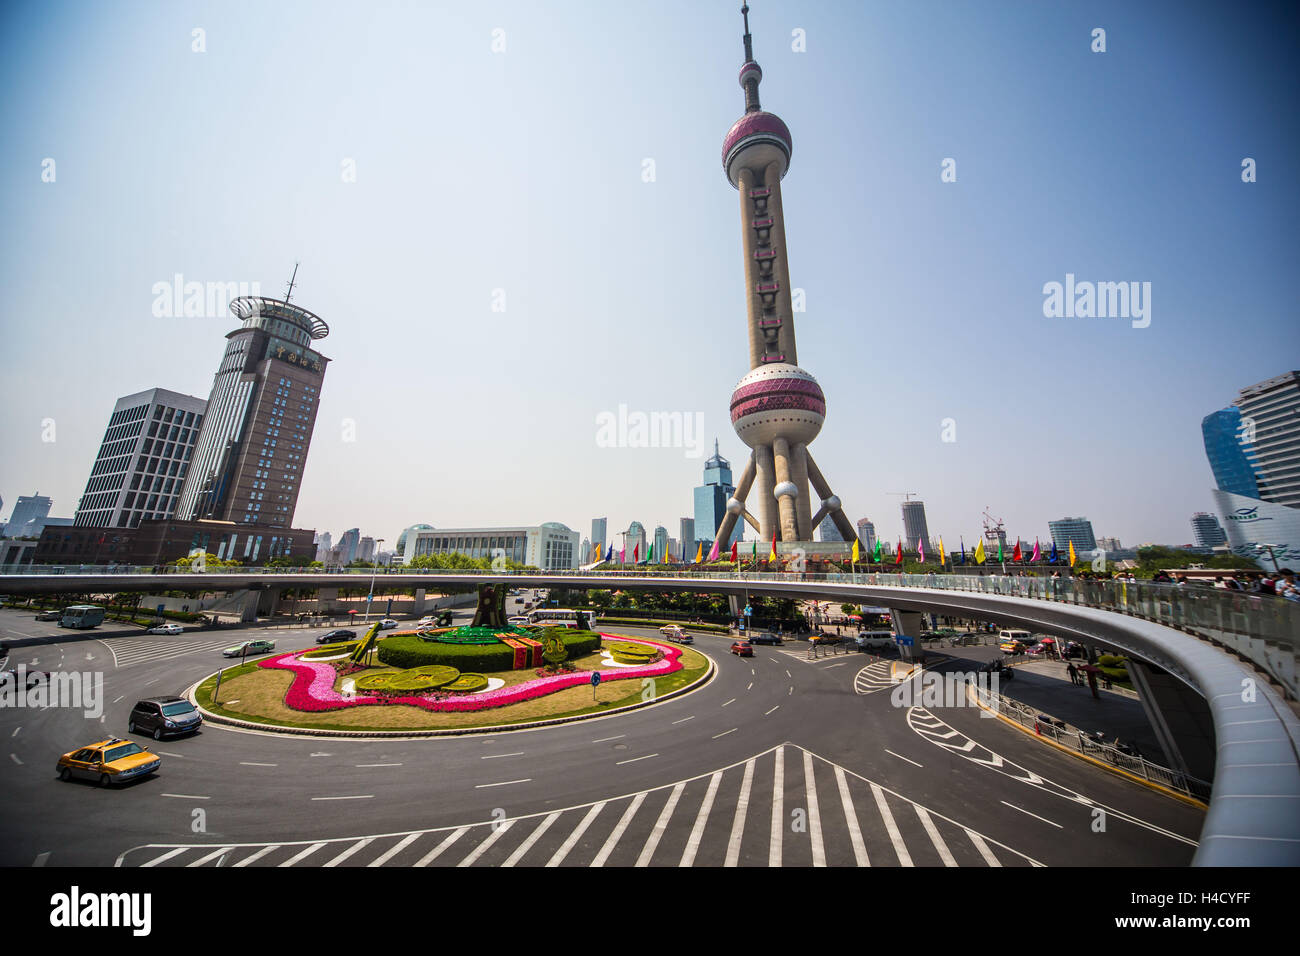 Asia, Cina Shanghai Pudong, Oriental Pearl TV Tower Foto Stock